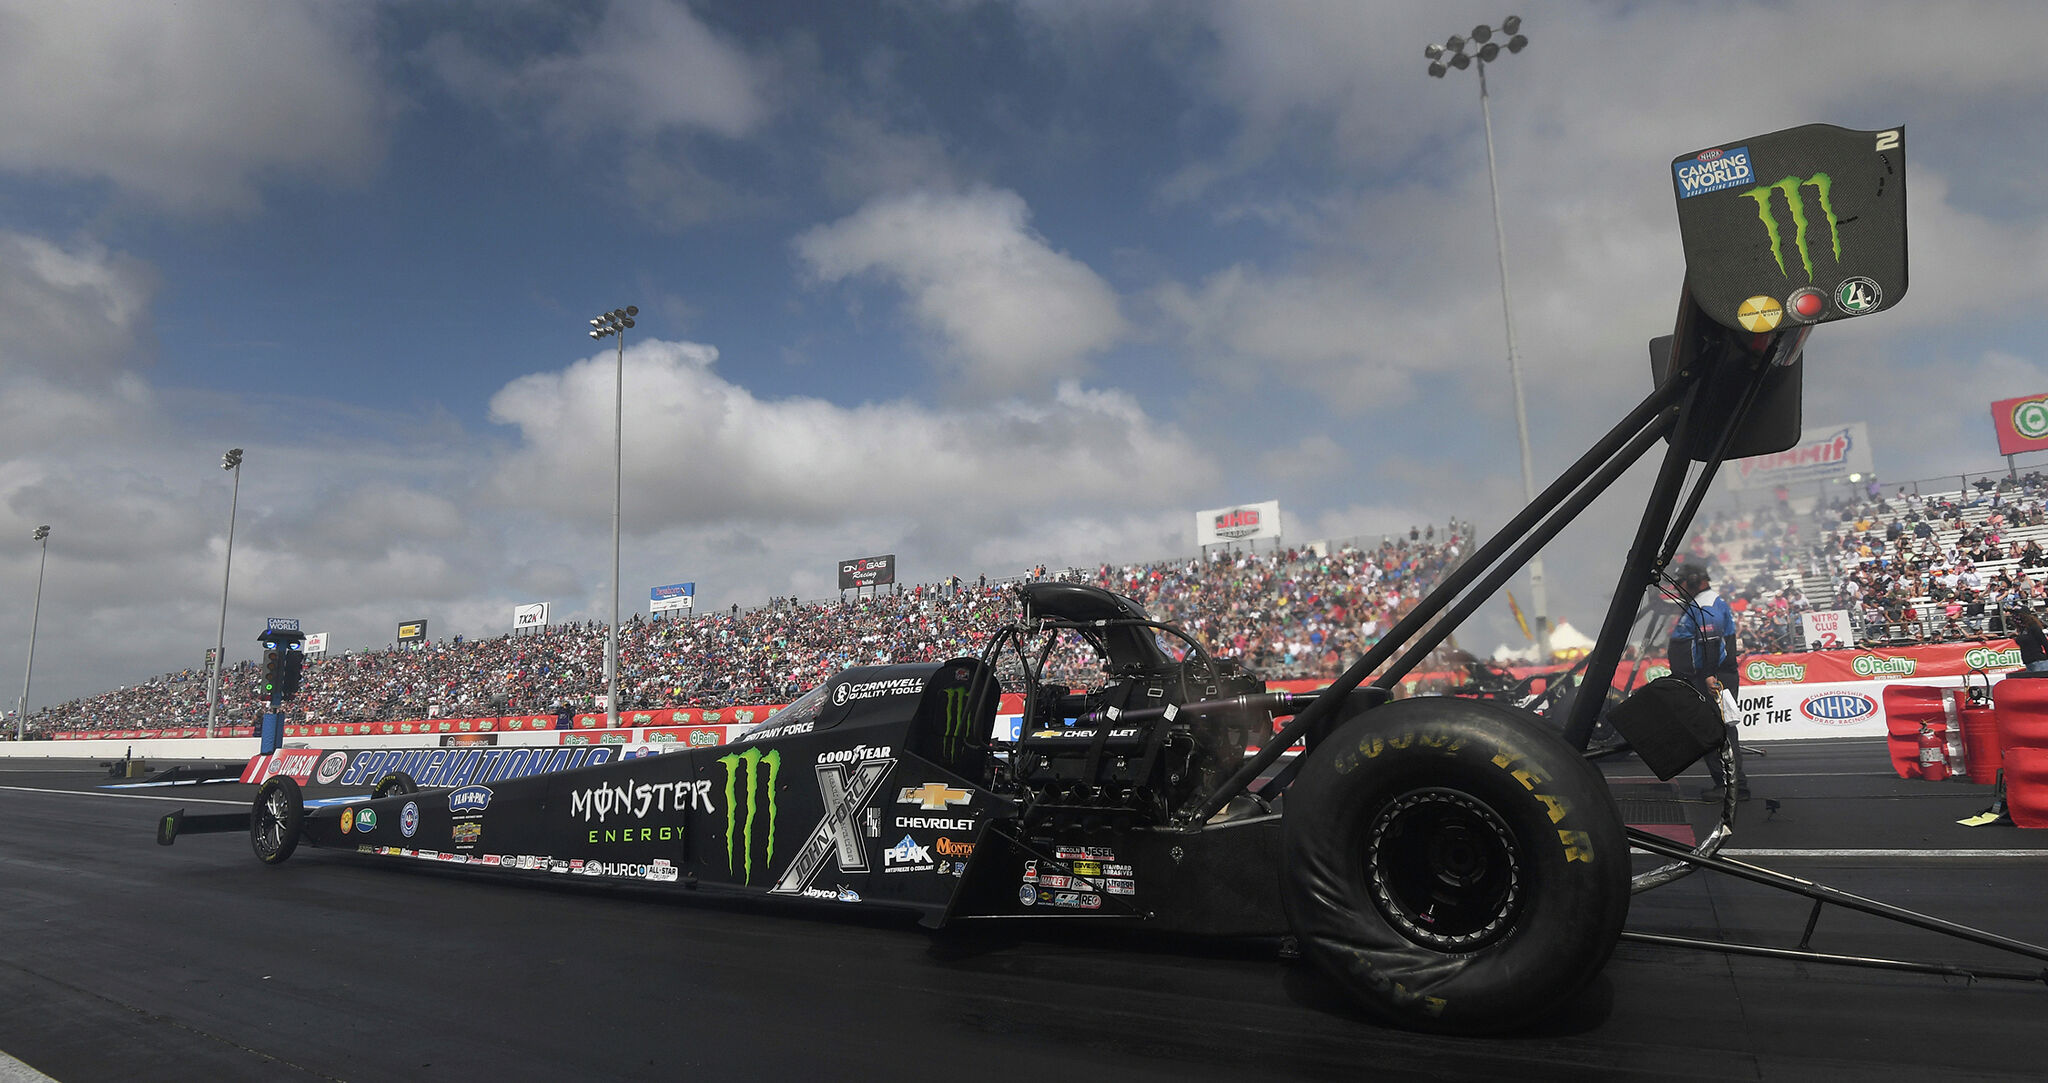 SpringNationals: Brittany Force wins Top Fuel in finale at Houston Raceway Park